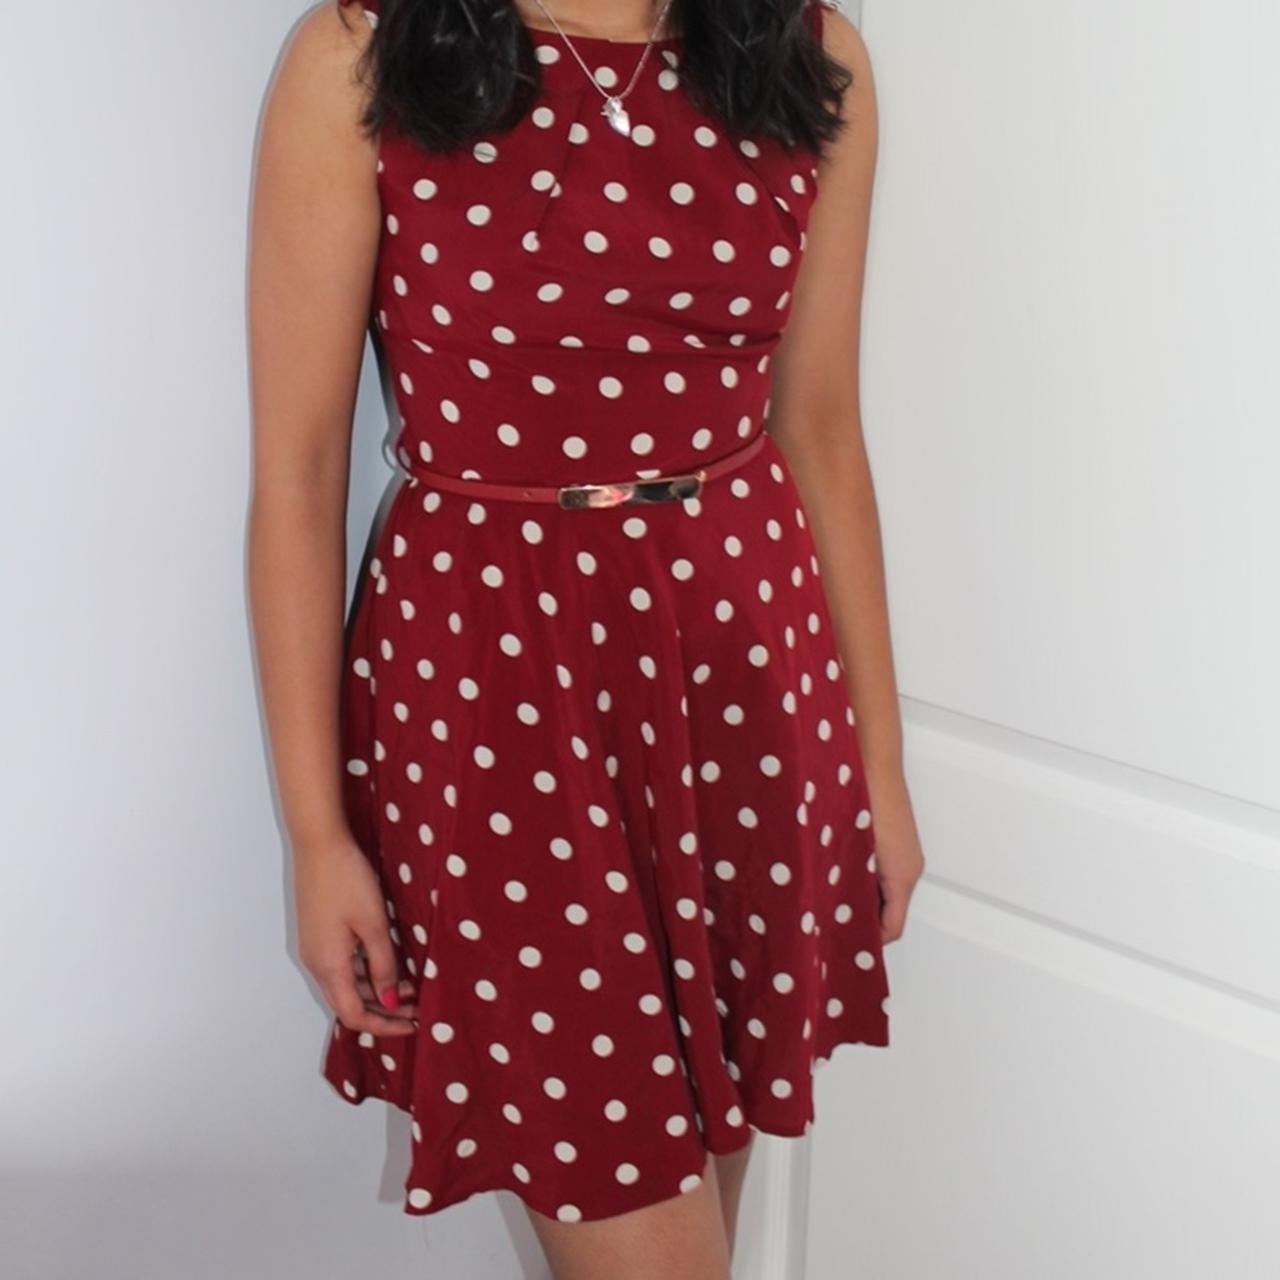 Product Image 2 - Red and white polka dot